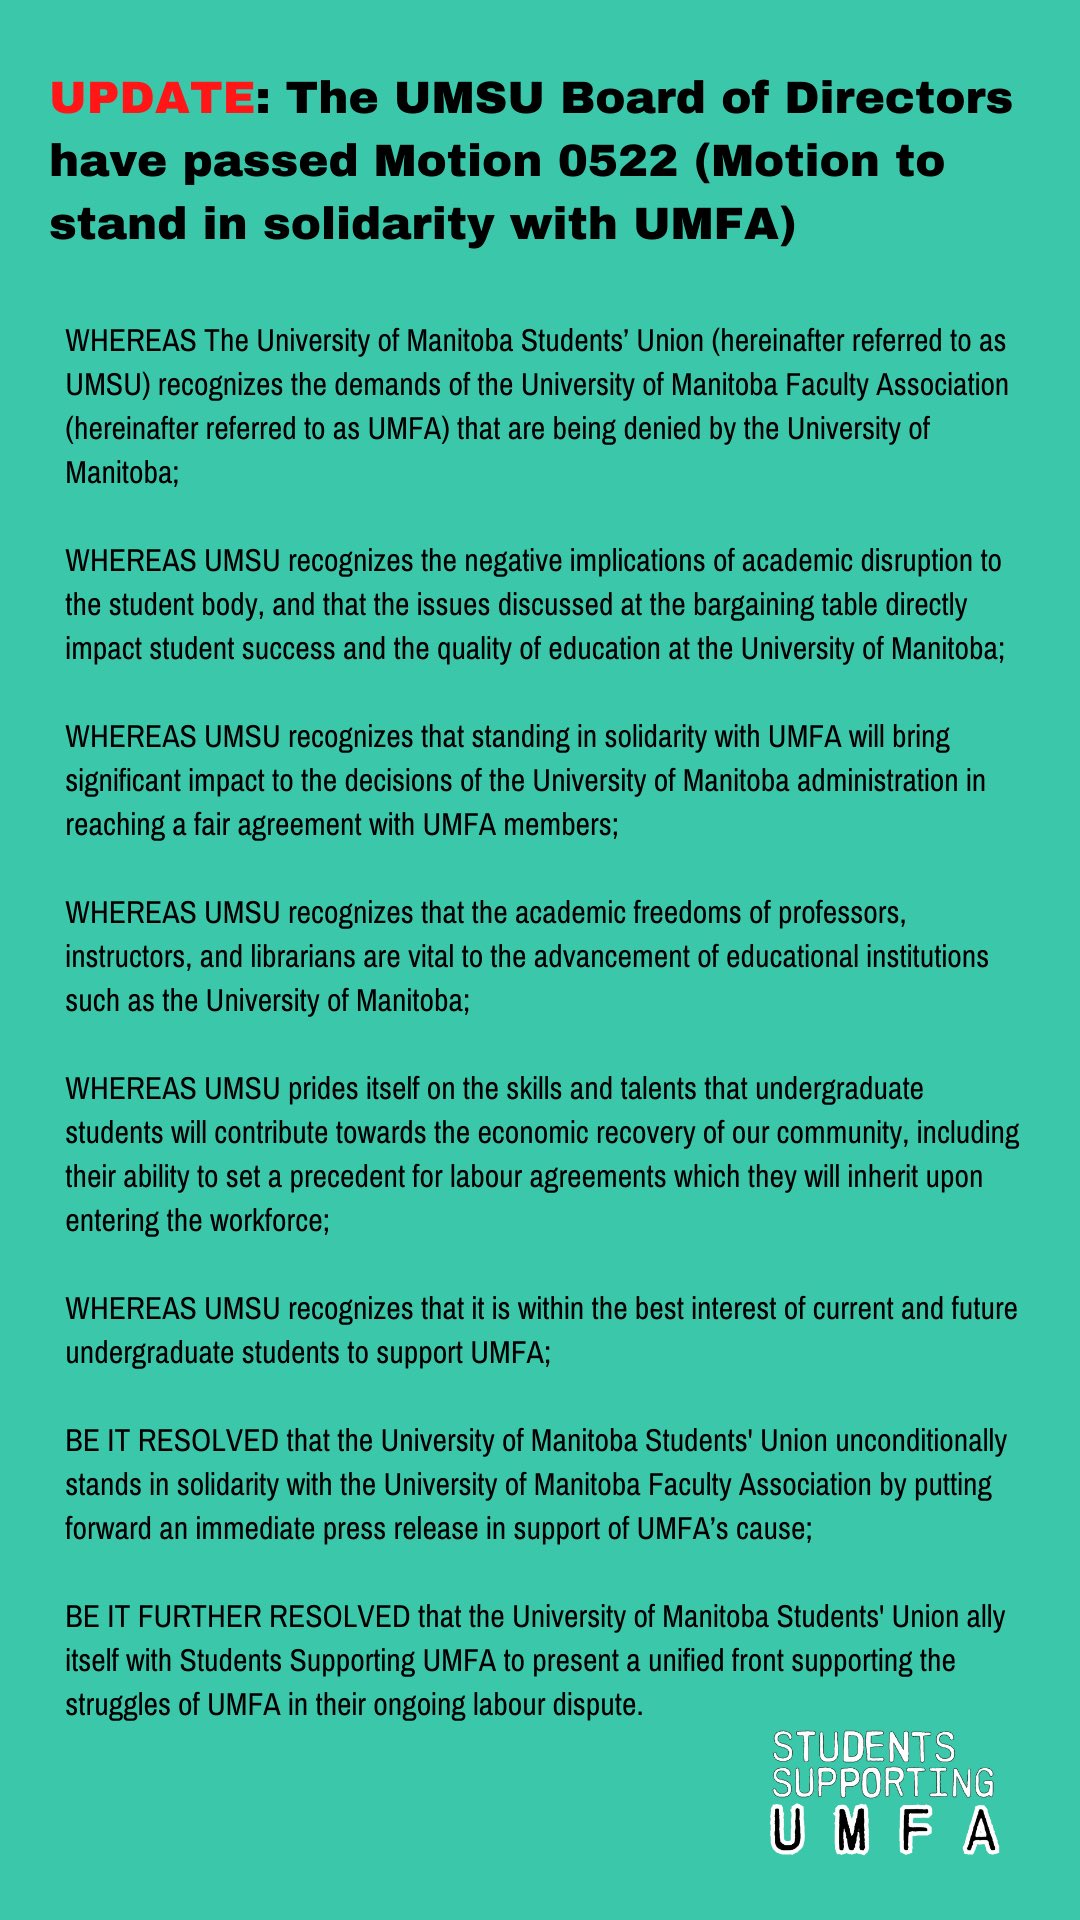 Students Supporting UMFA UMSU motion to stand in solidarity with UMFA Oct21